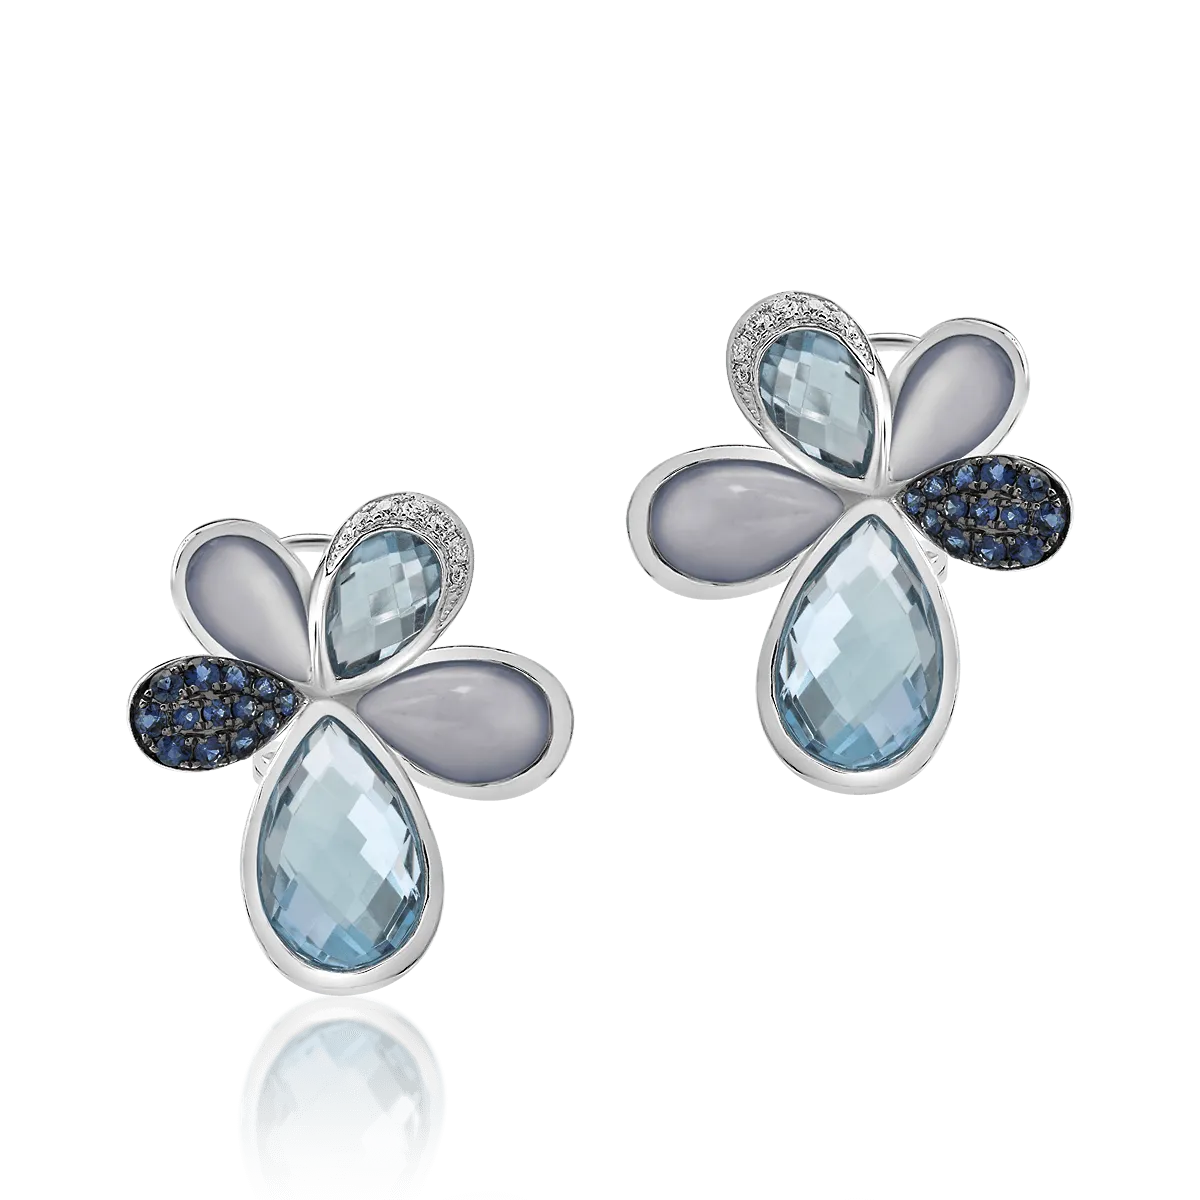 18K white gold earrings with 16.26ct precious and semiprecious stones